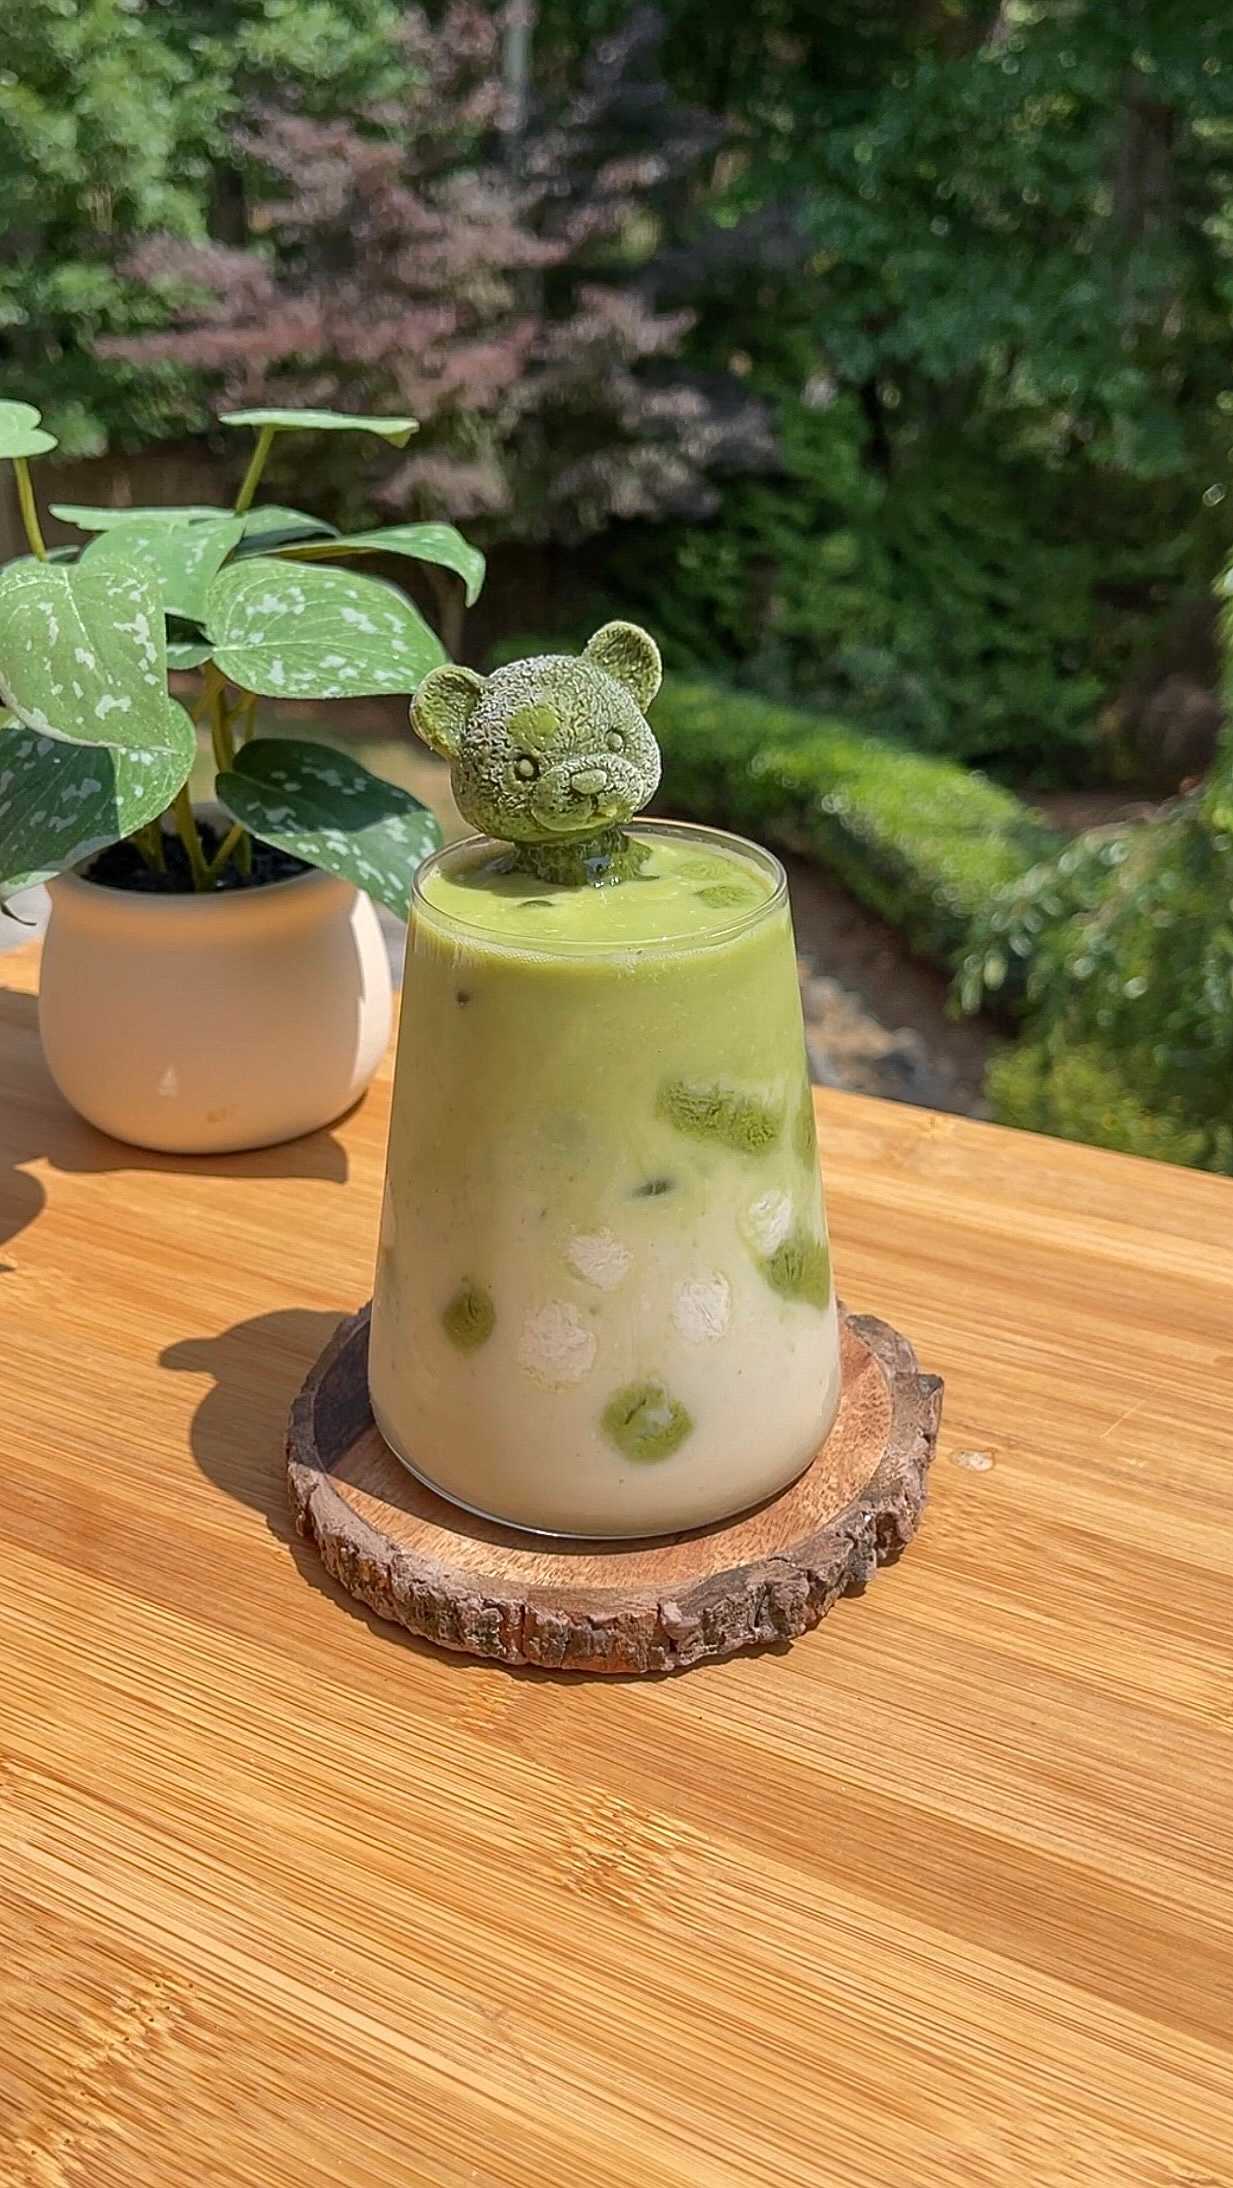 An iced matcha latte in a glass cup sits in the forefront of the image with foliage in the back.